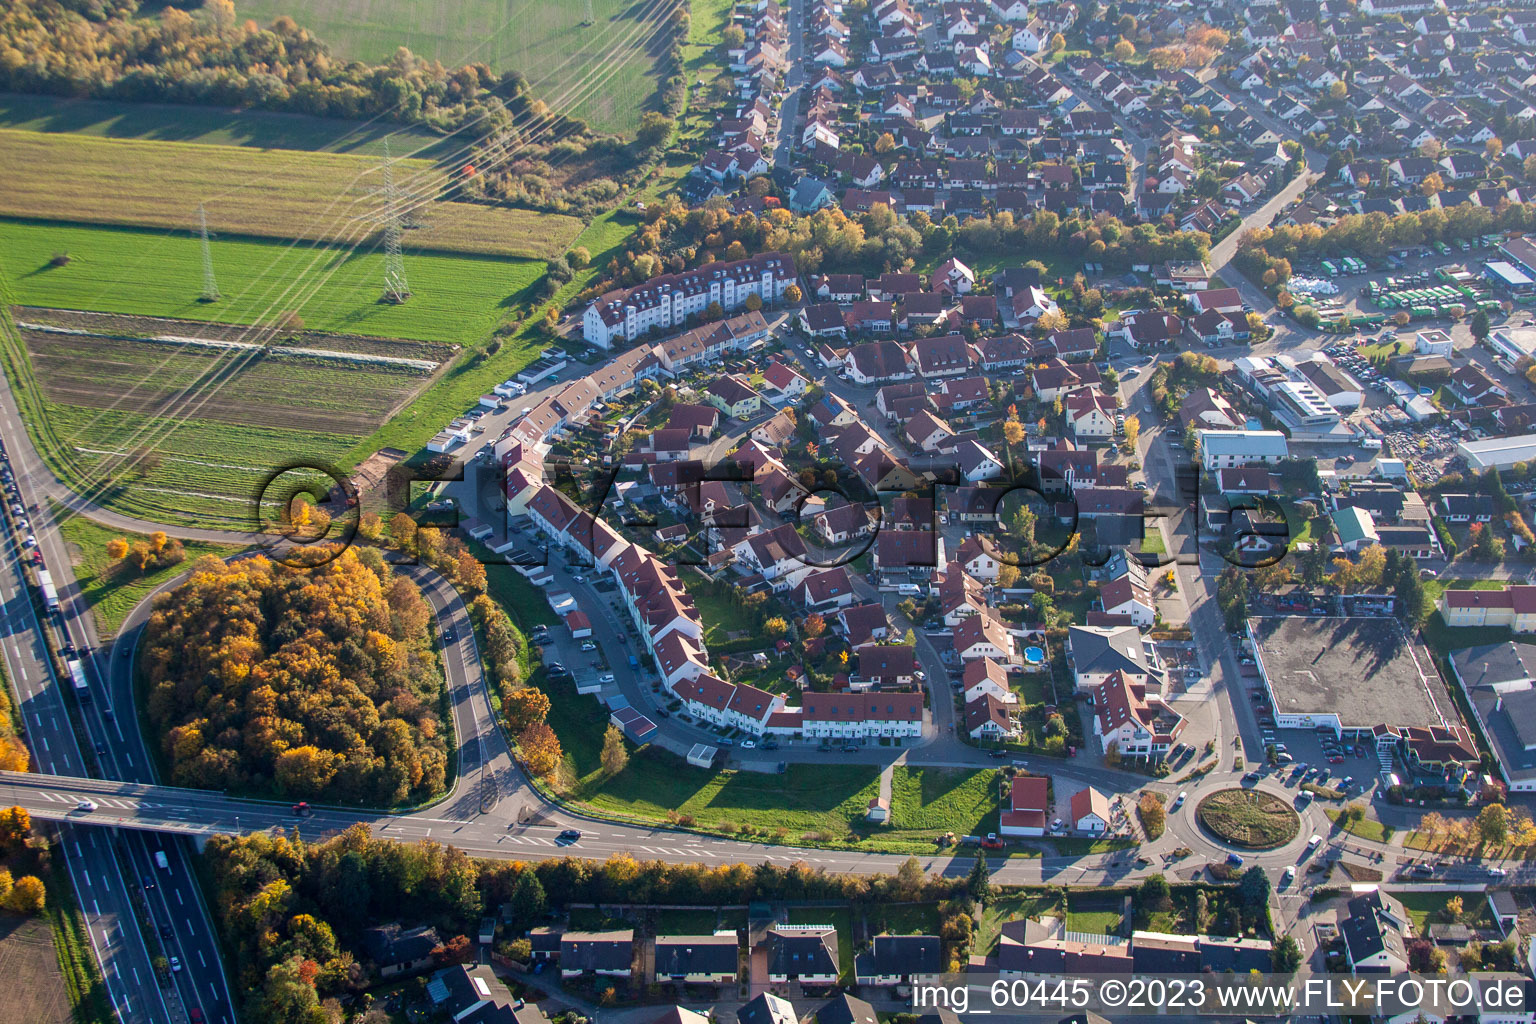 Aerial view of S in Rülzheim in the state Rhineland-Palatinate, Germany